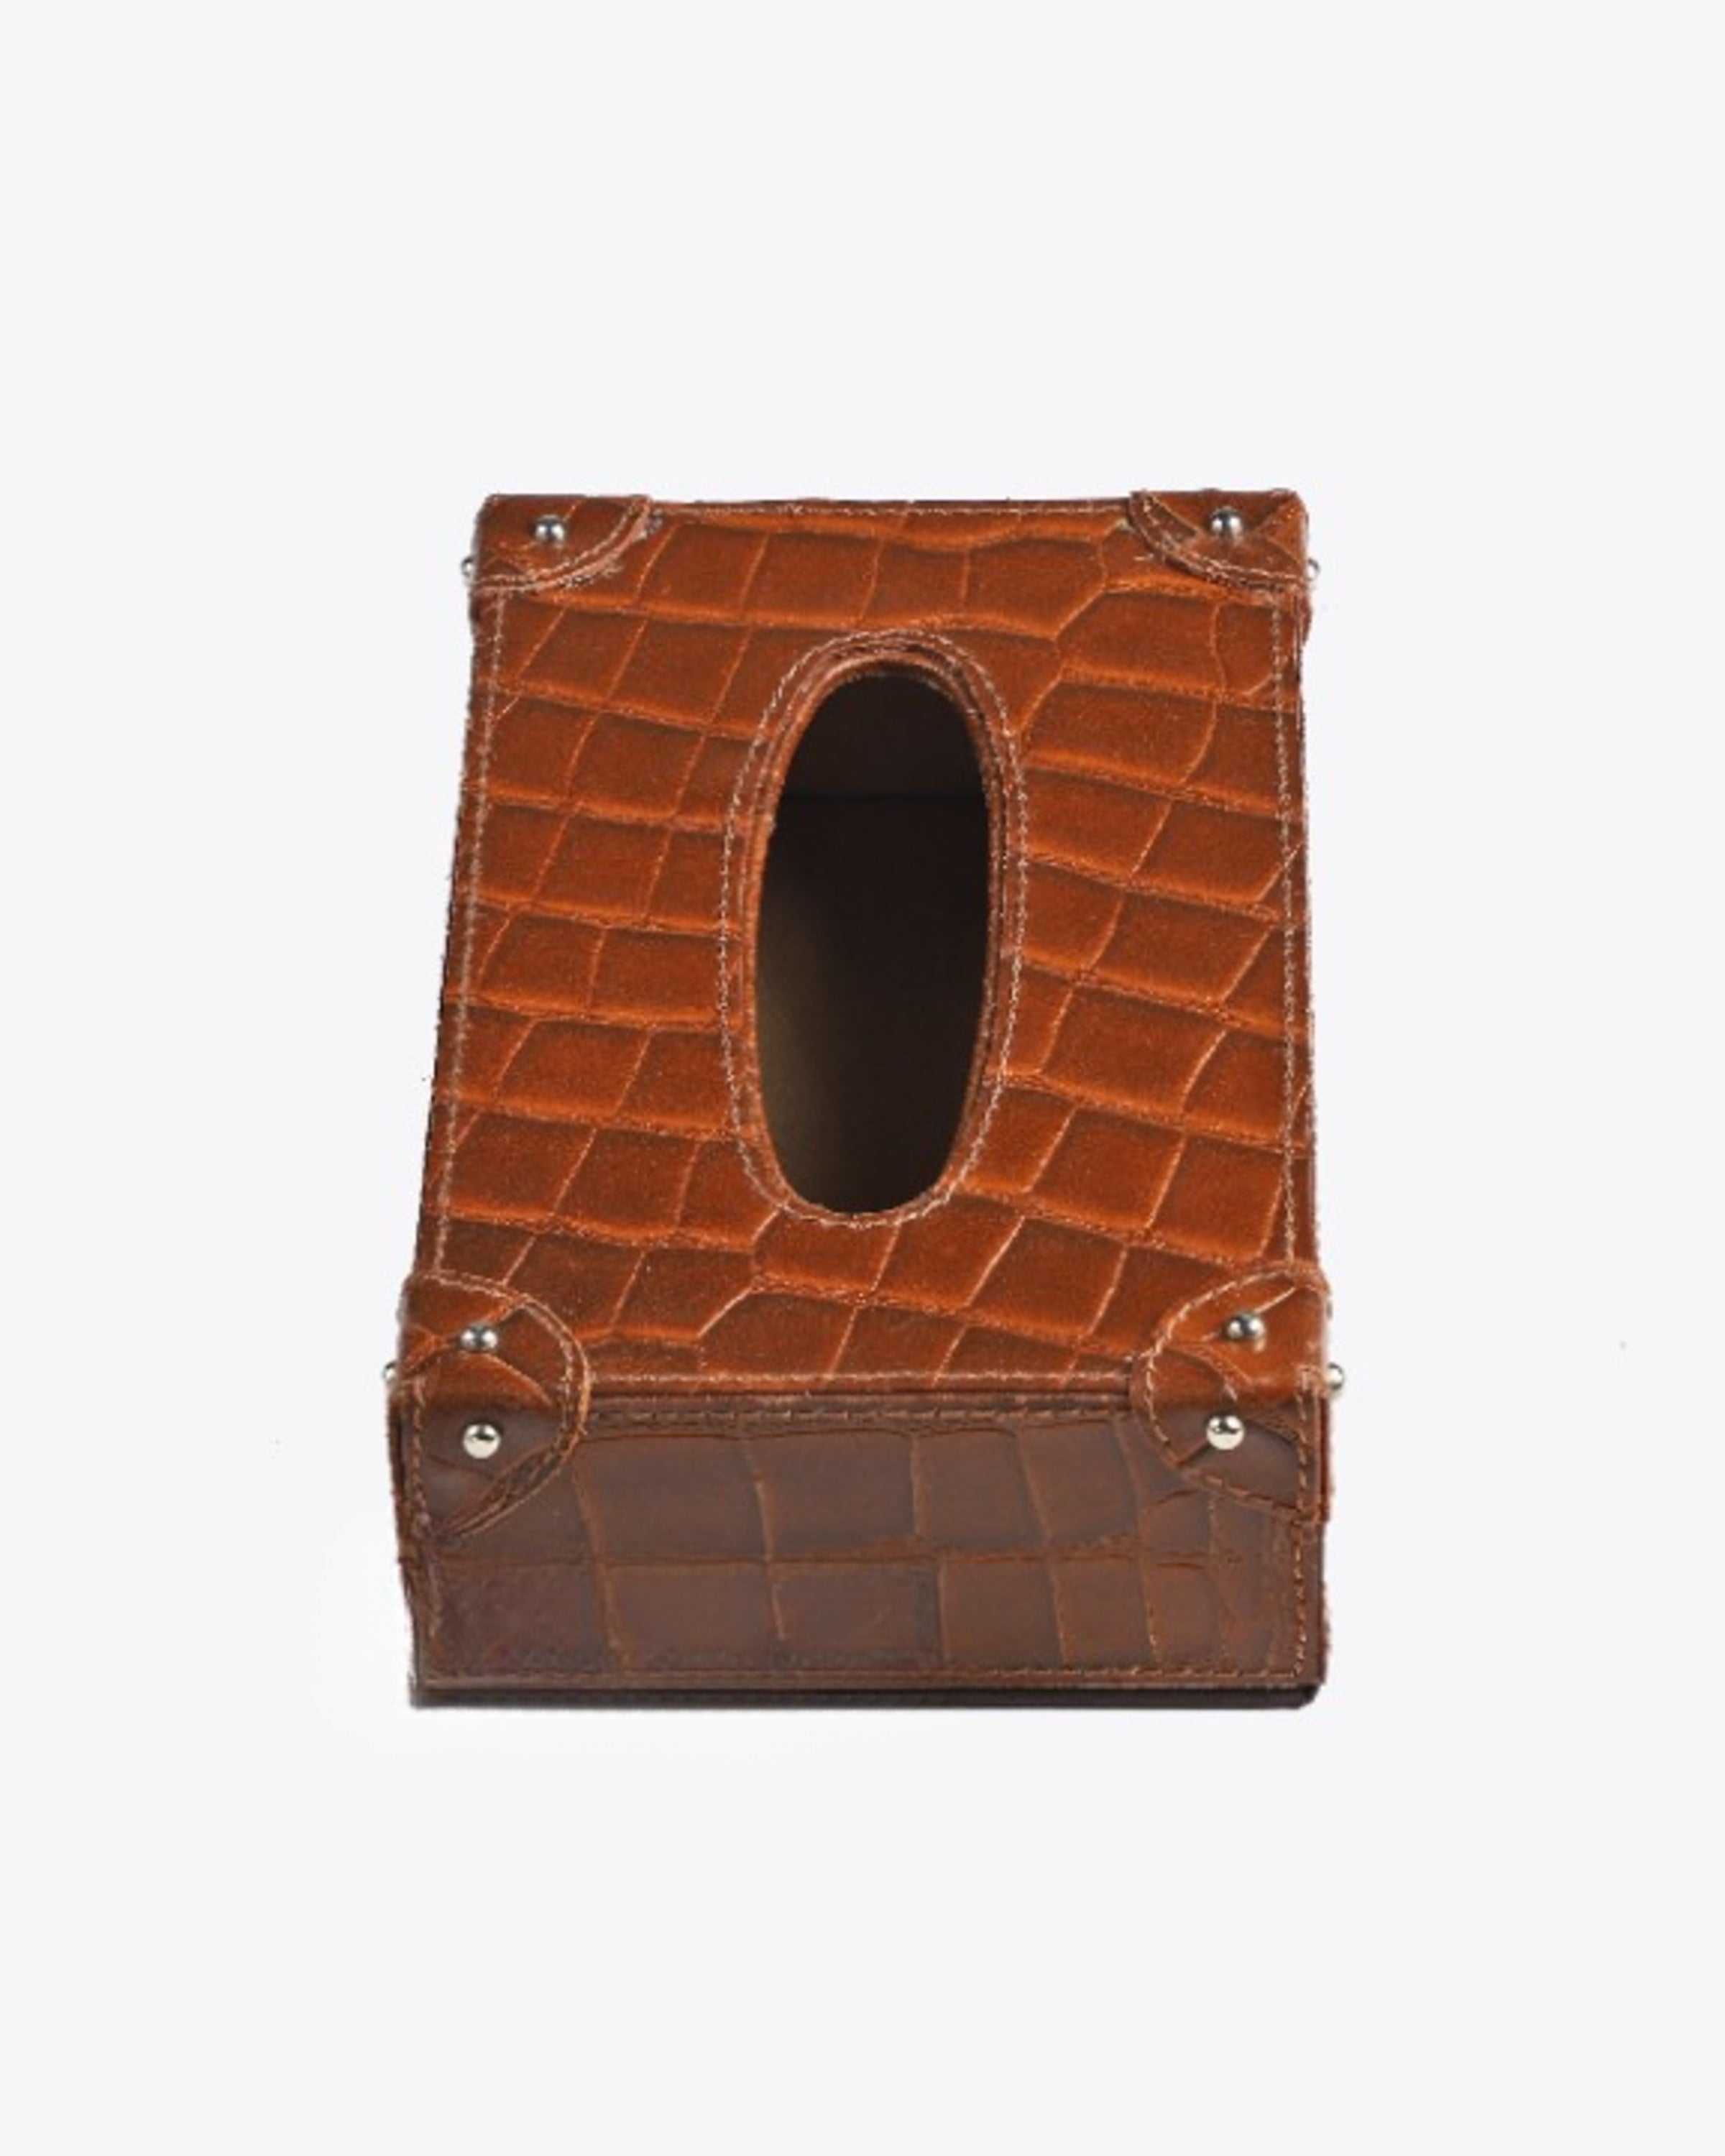 AMAR BROWN LEATHER BOX ANGIE HOMES